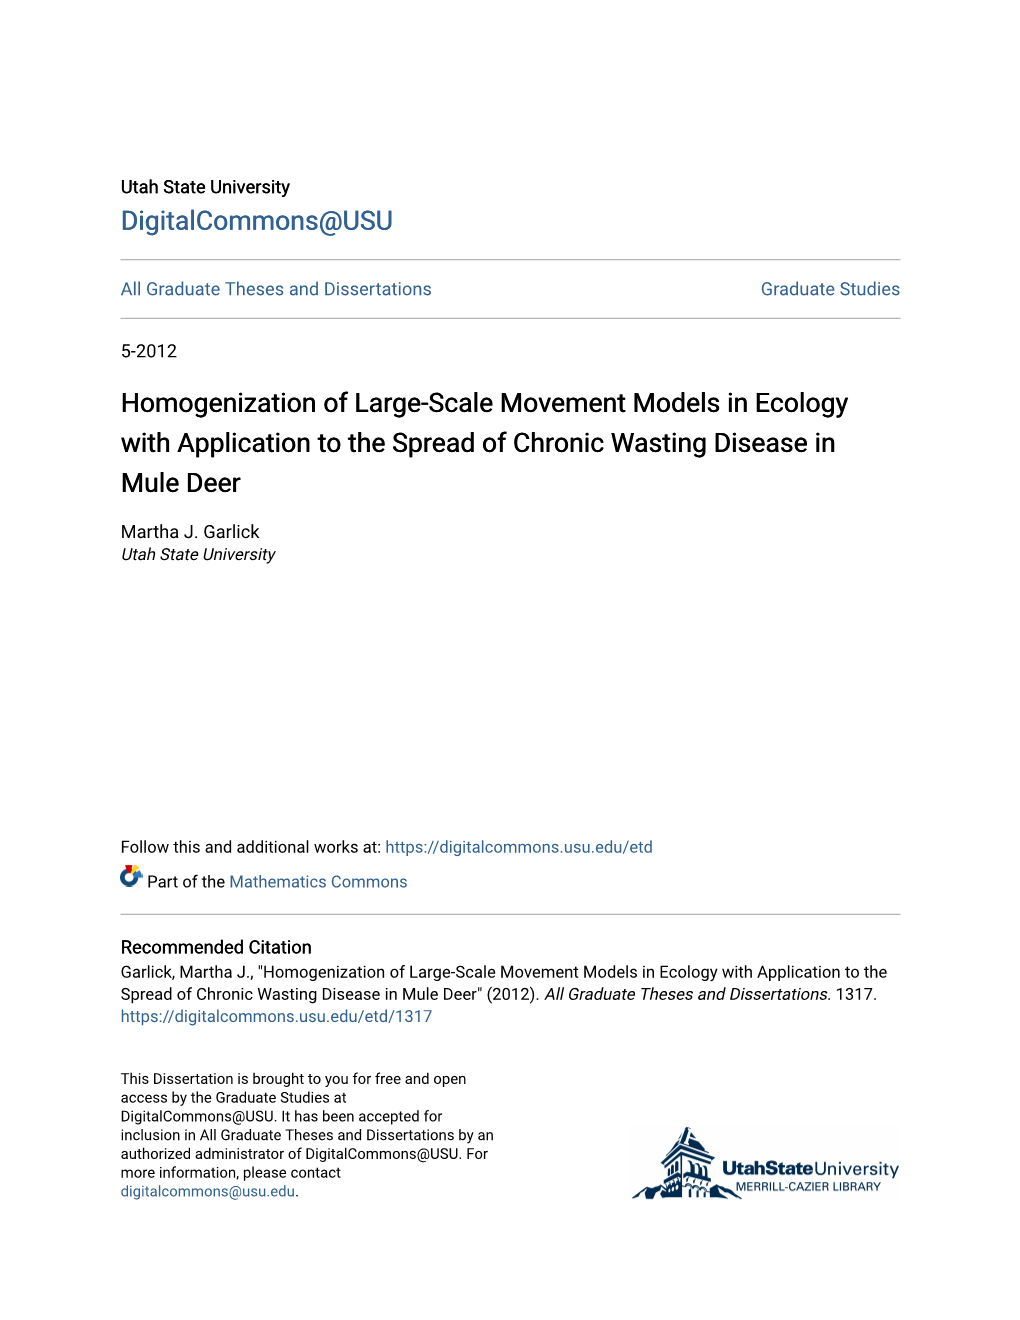 Homogenization of Large-Scale Movement Models in Ecology with Application to the Spread of Chronic Wasting Disease in Mule Deer